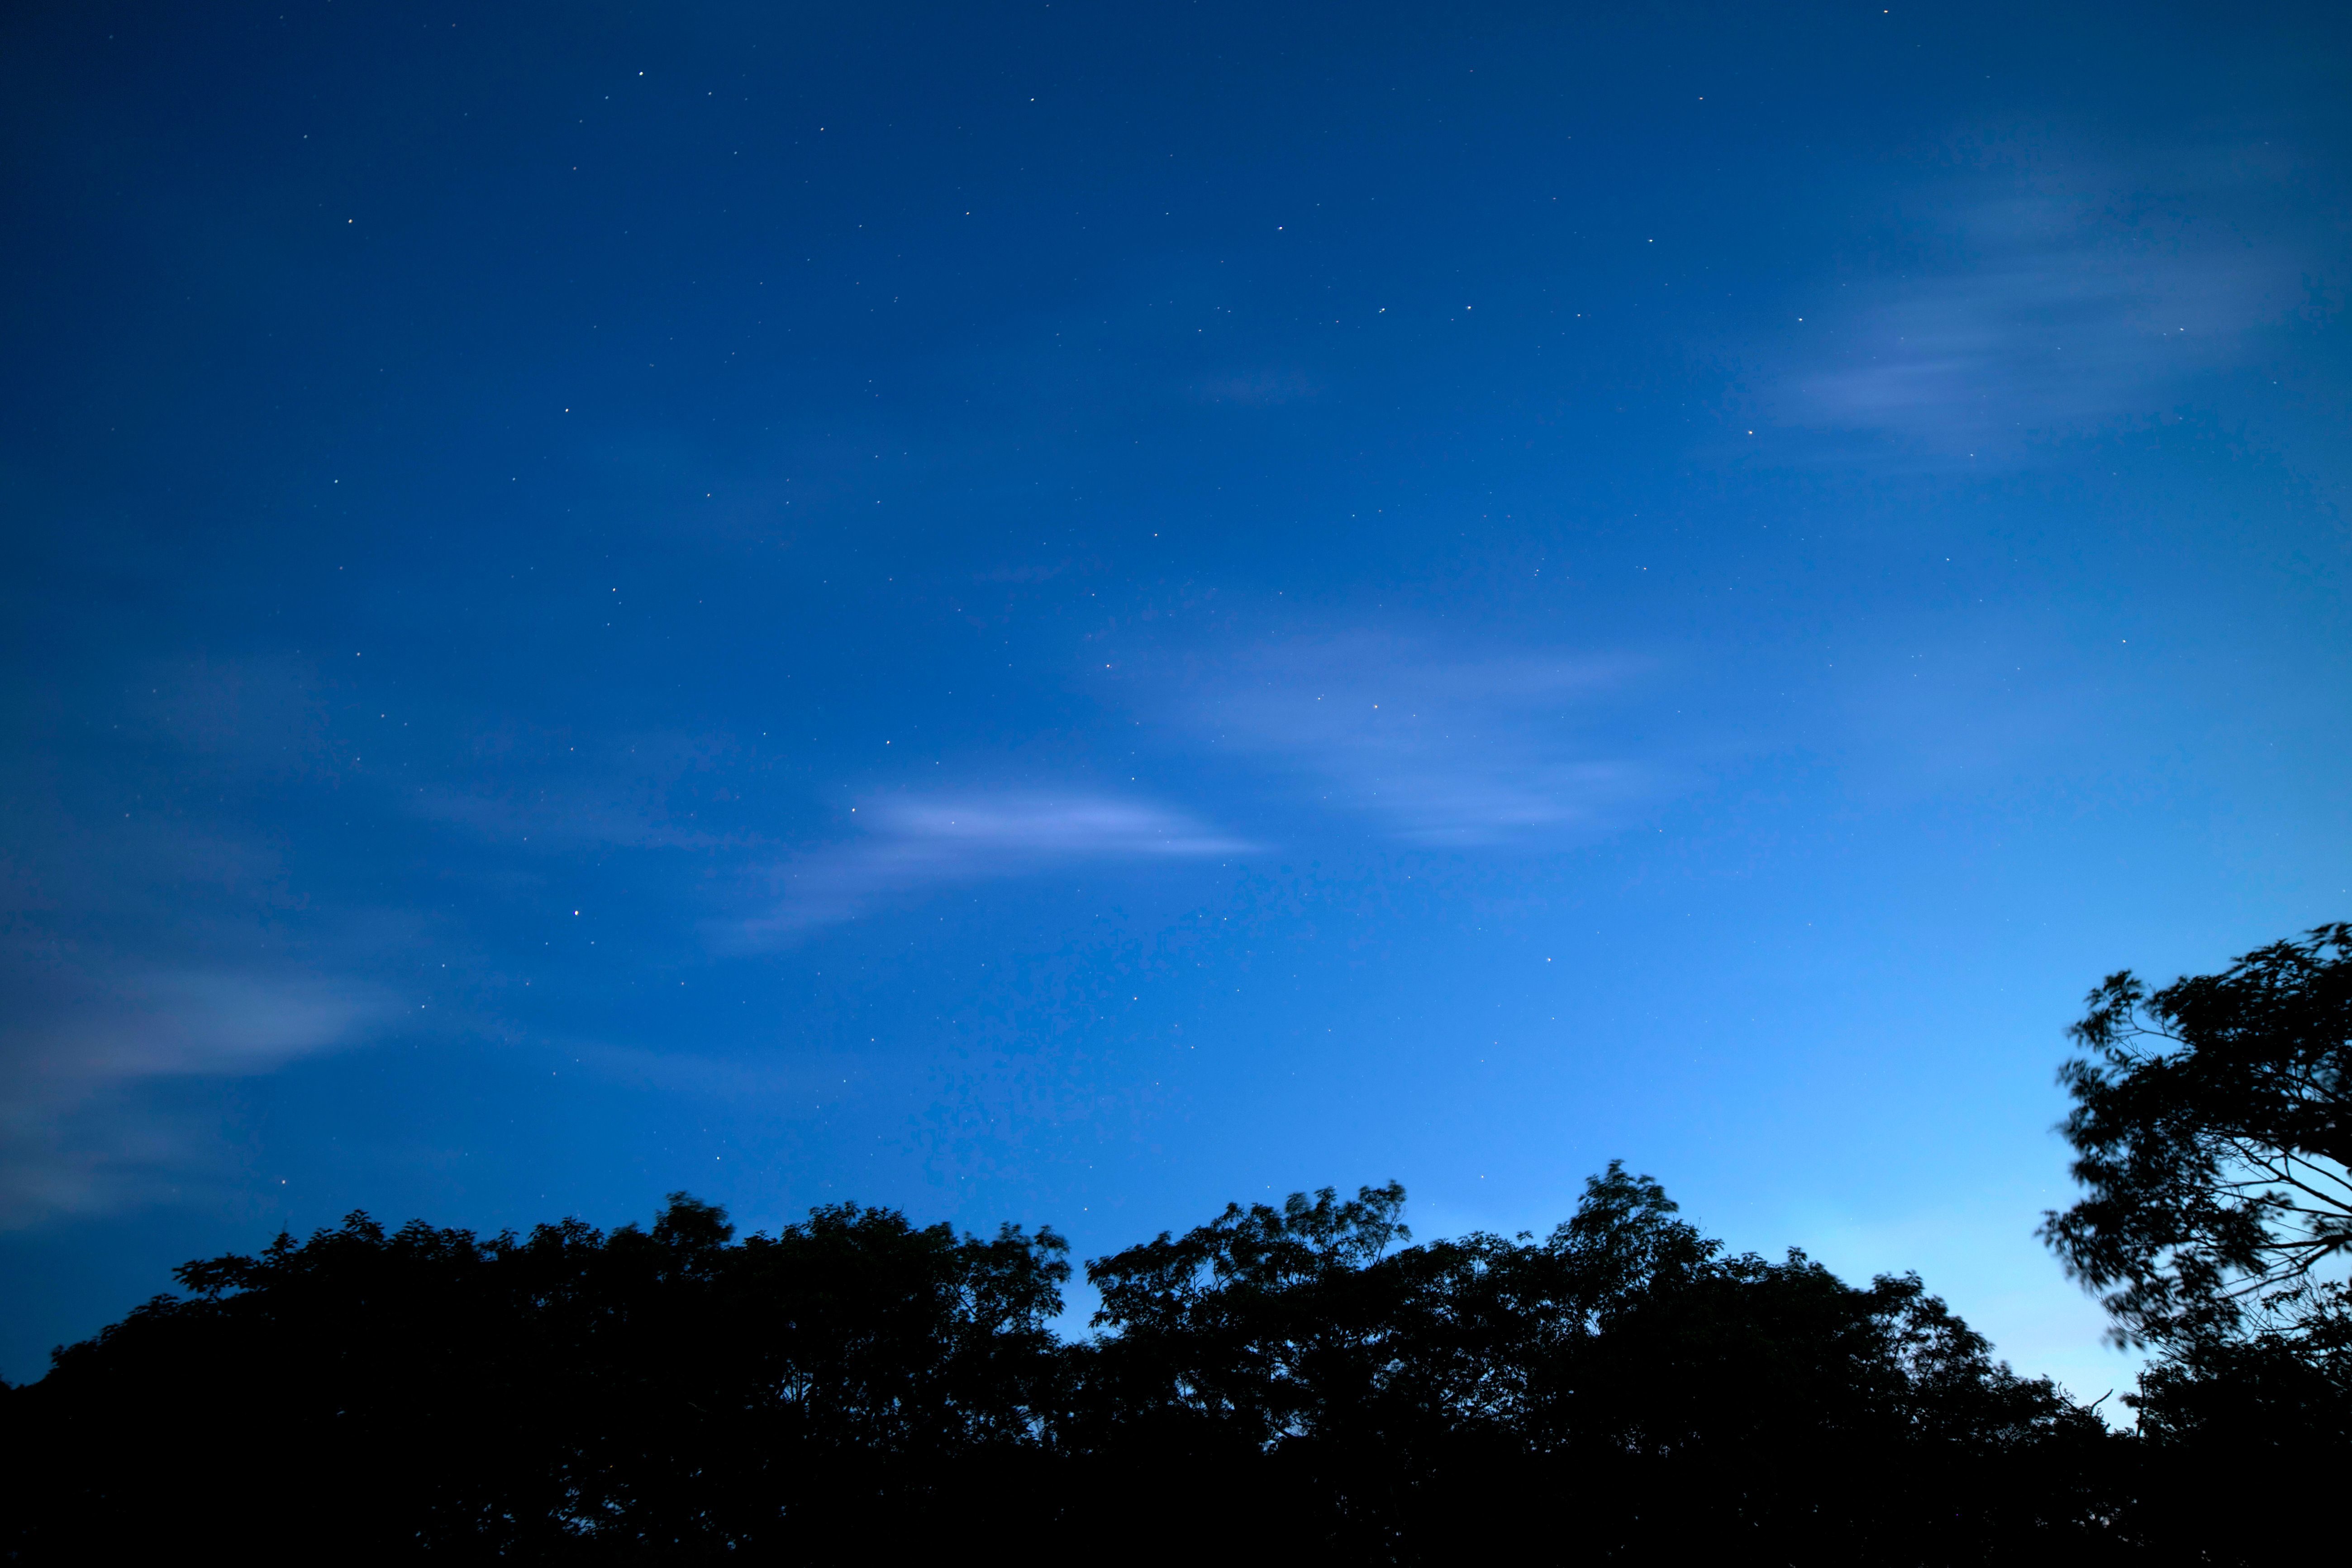 Free picture: dark blue sky, clear sky, dusk, stars, clouds, trees ...